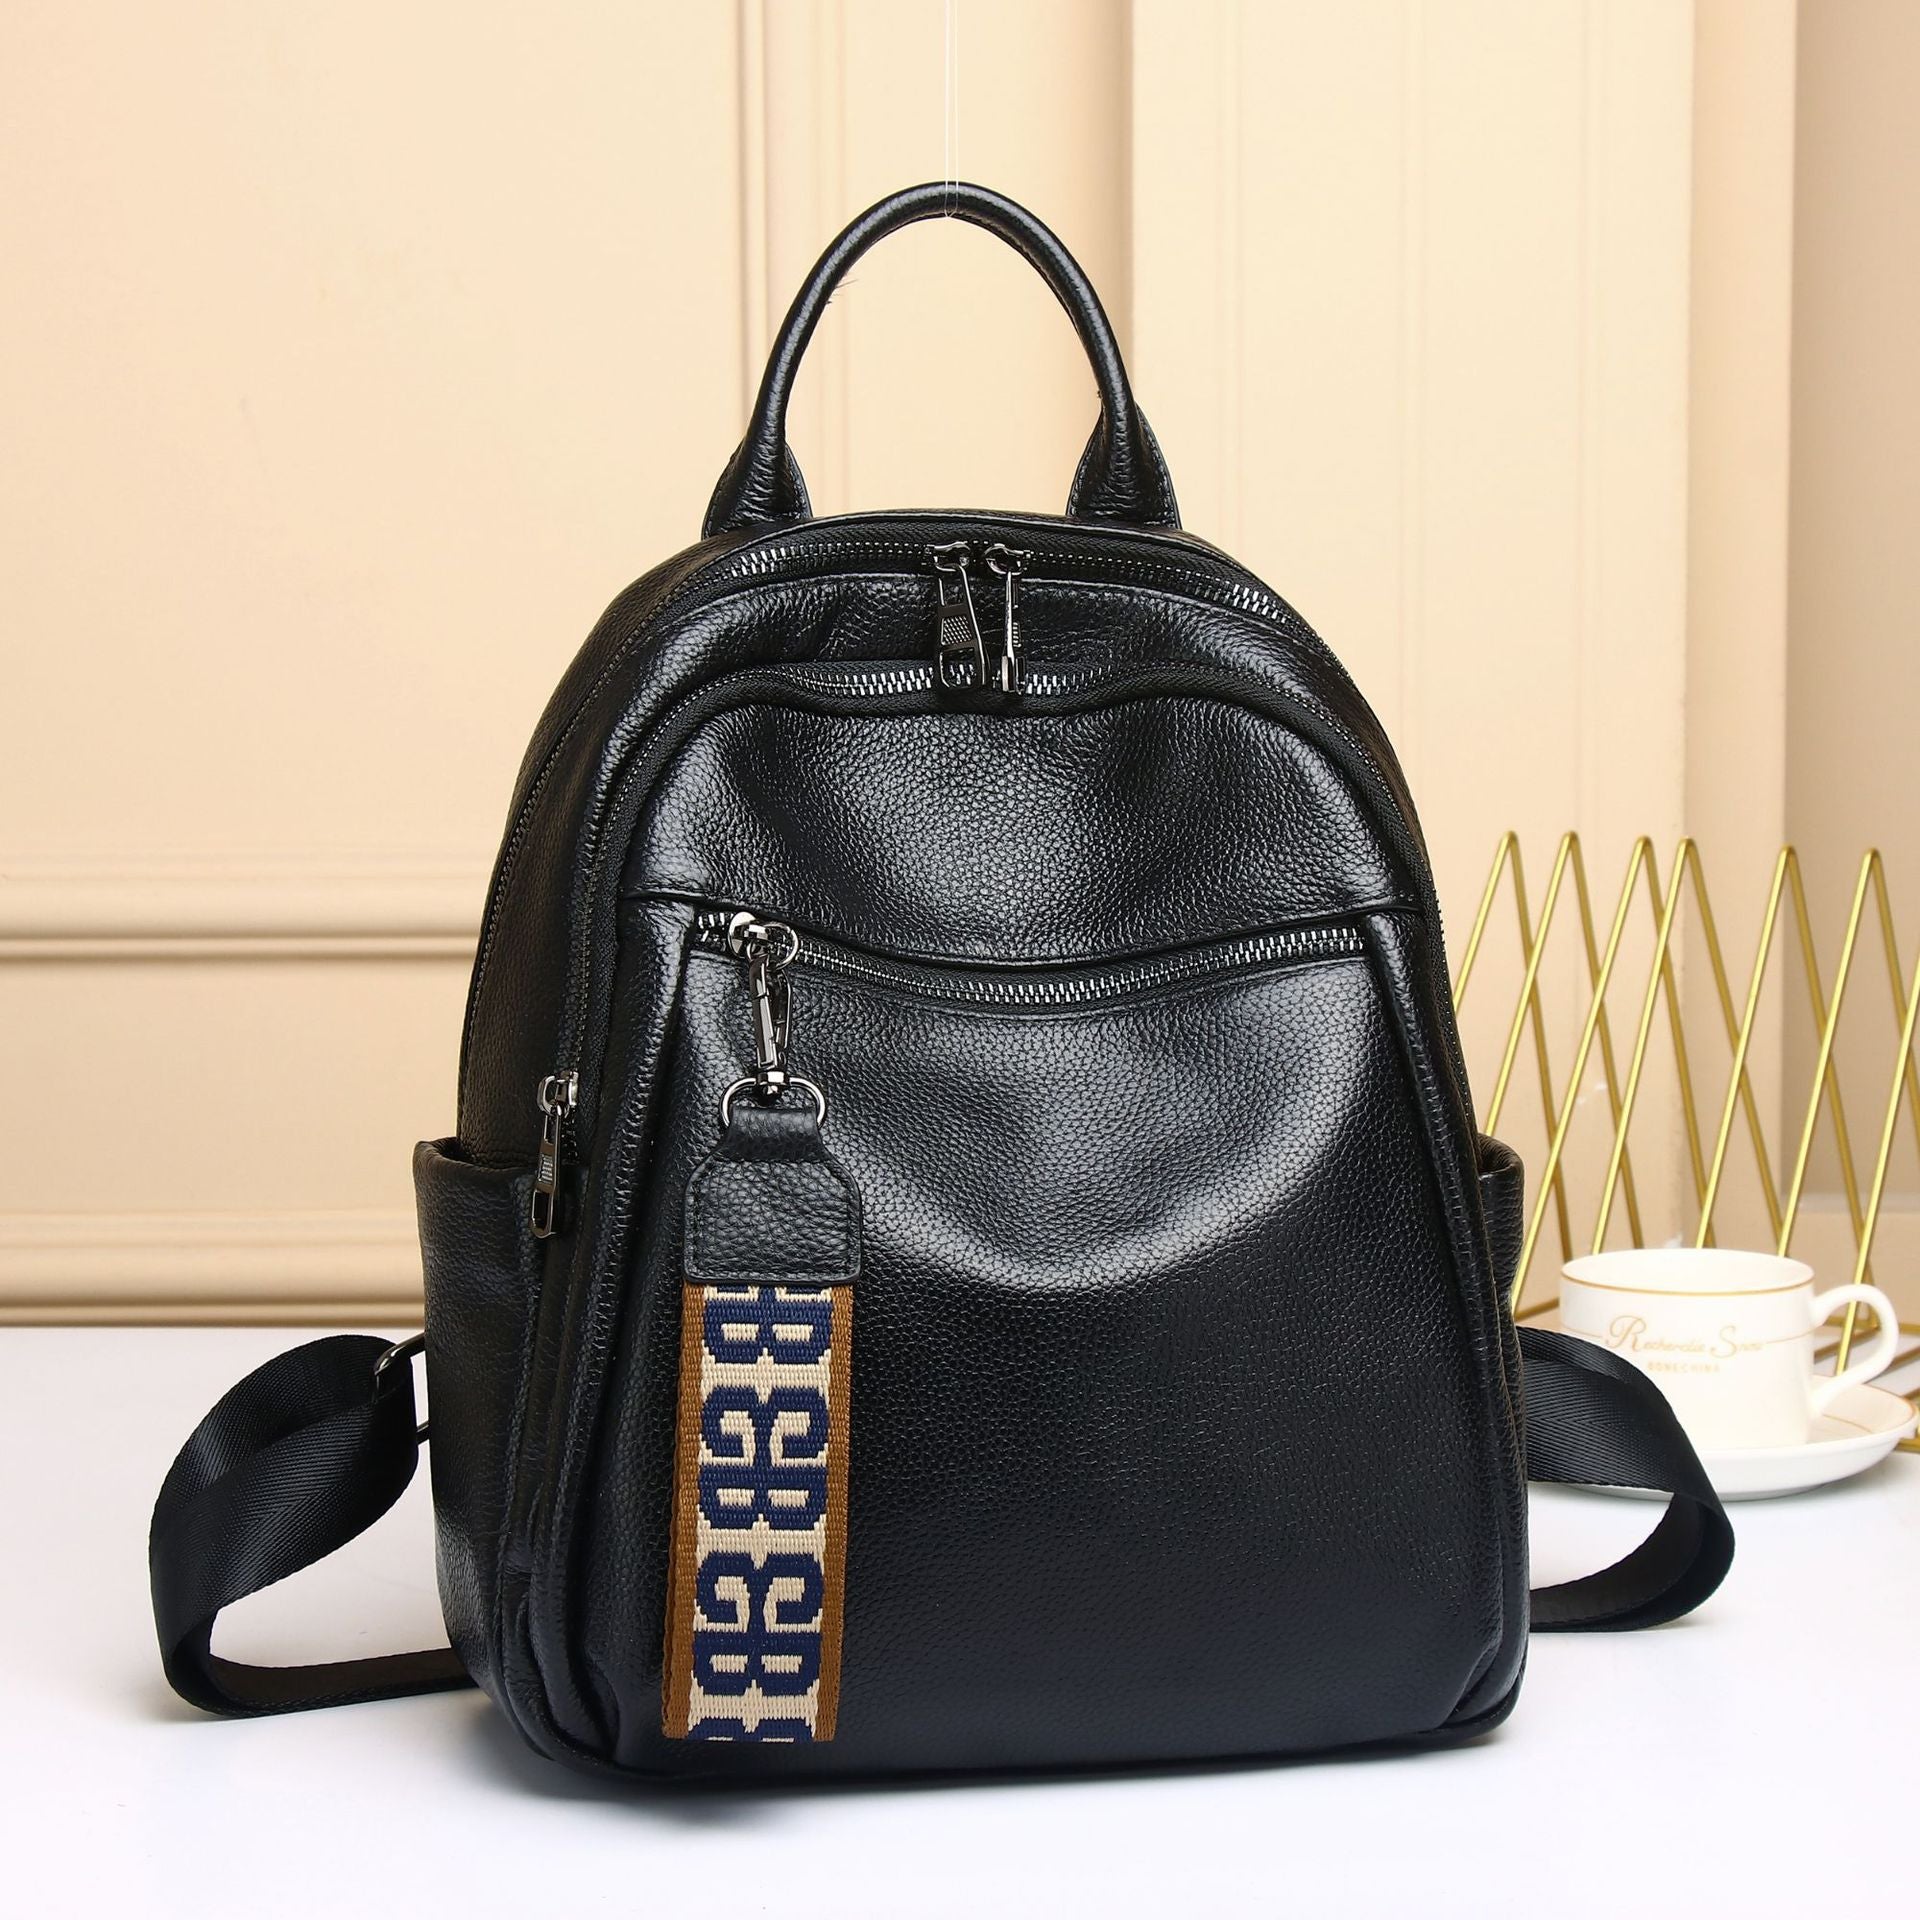 Genuine Leather Backpack  Backpack Soft Leather Lady Travel Bag Small Bags For Women Sac a Dos Casual Mochilas School Bags